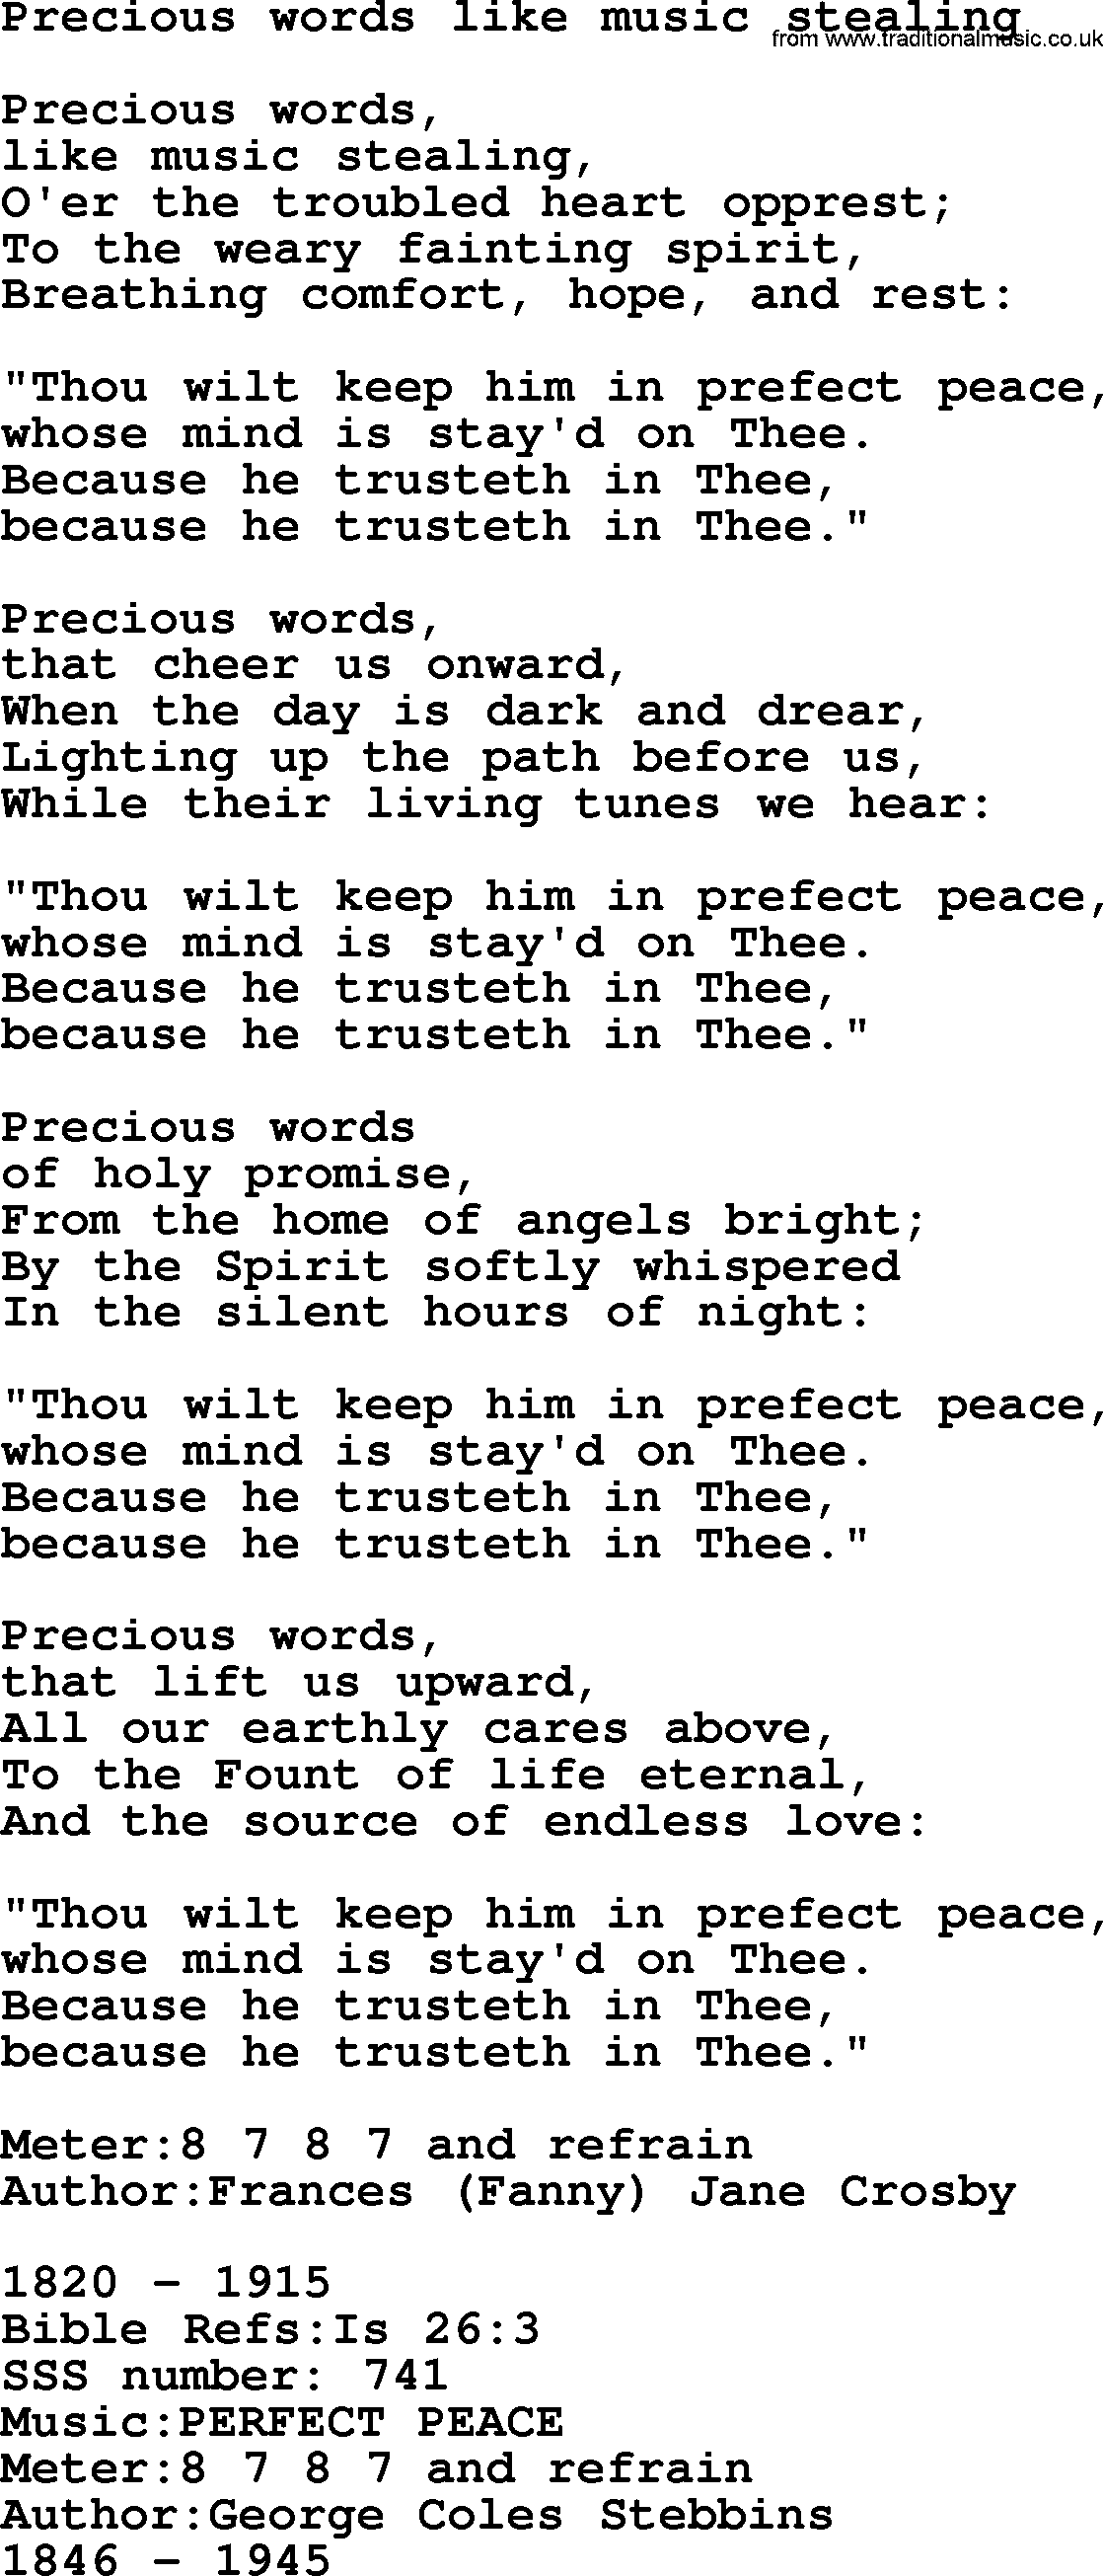 Sacred Songs and Solos complete, 1200 Hymns, title: Precious Words Like Music Stealing, lyrics and PDF